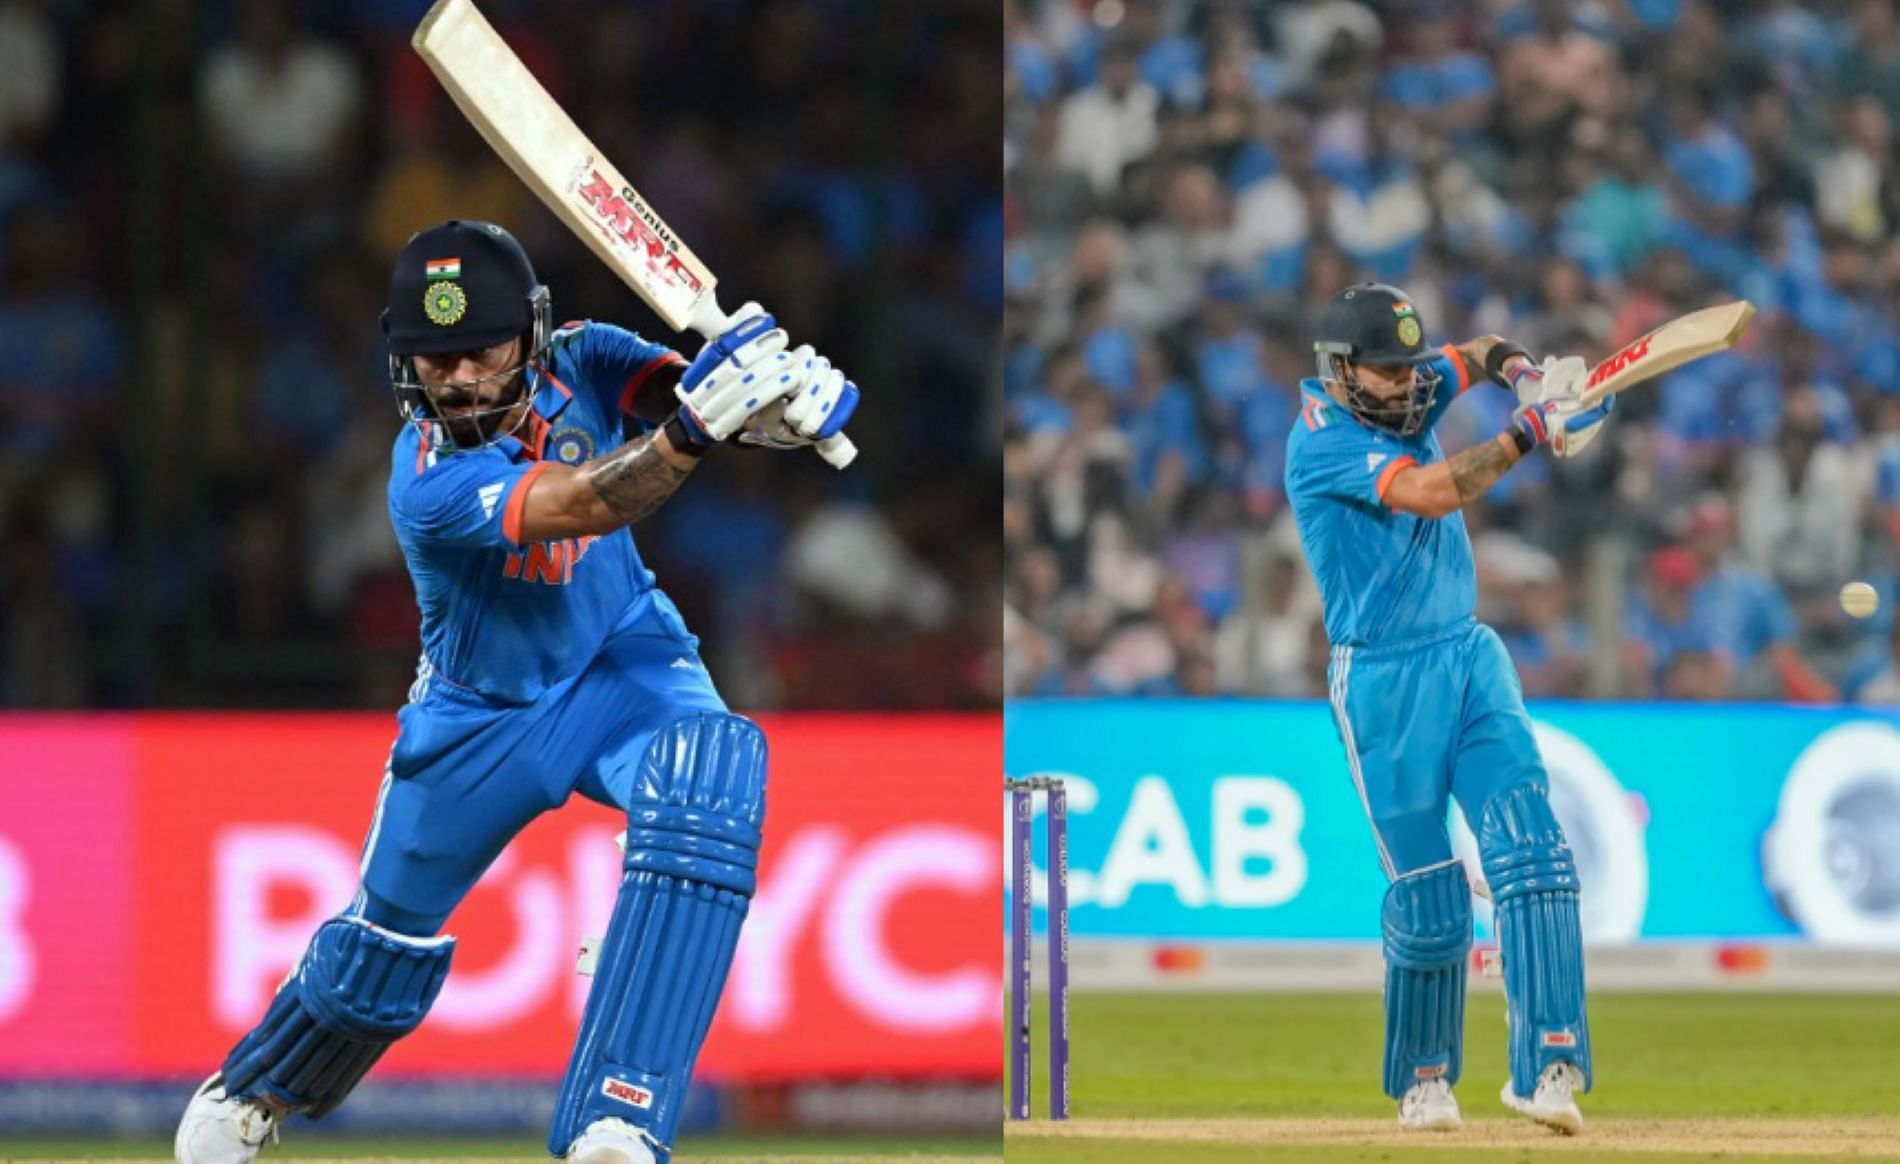 Kohli had a magnificent 2023 World Cup with the bat